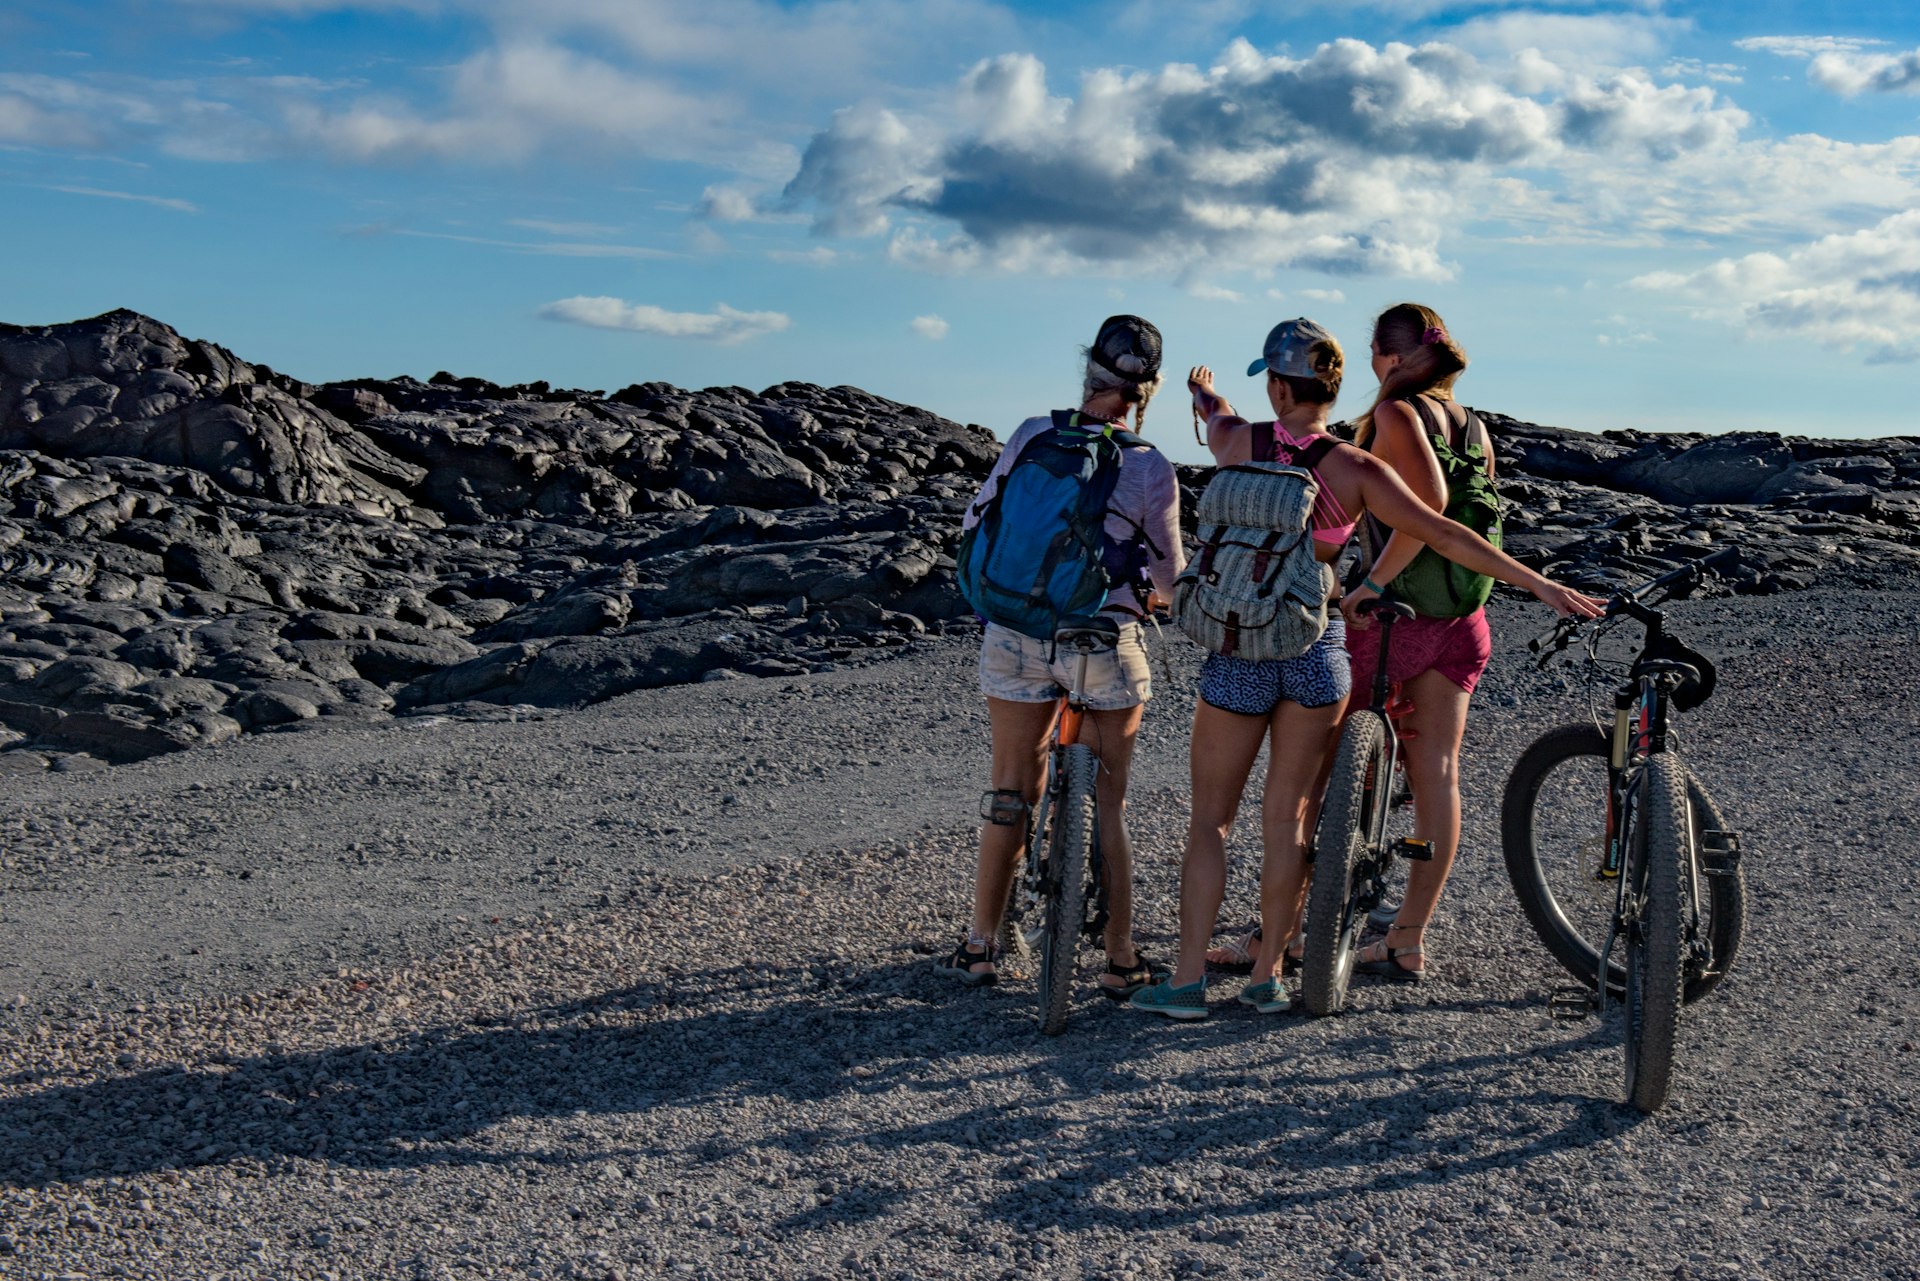 Three young women on bikes on the Chain of Craters road in Hawaii